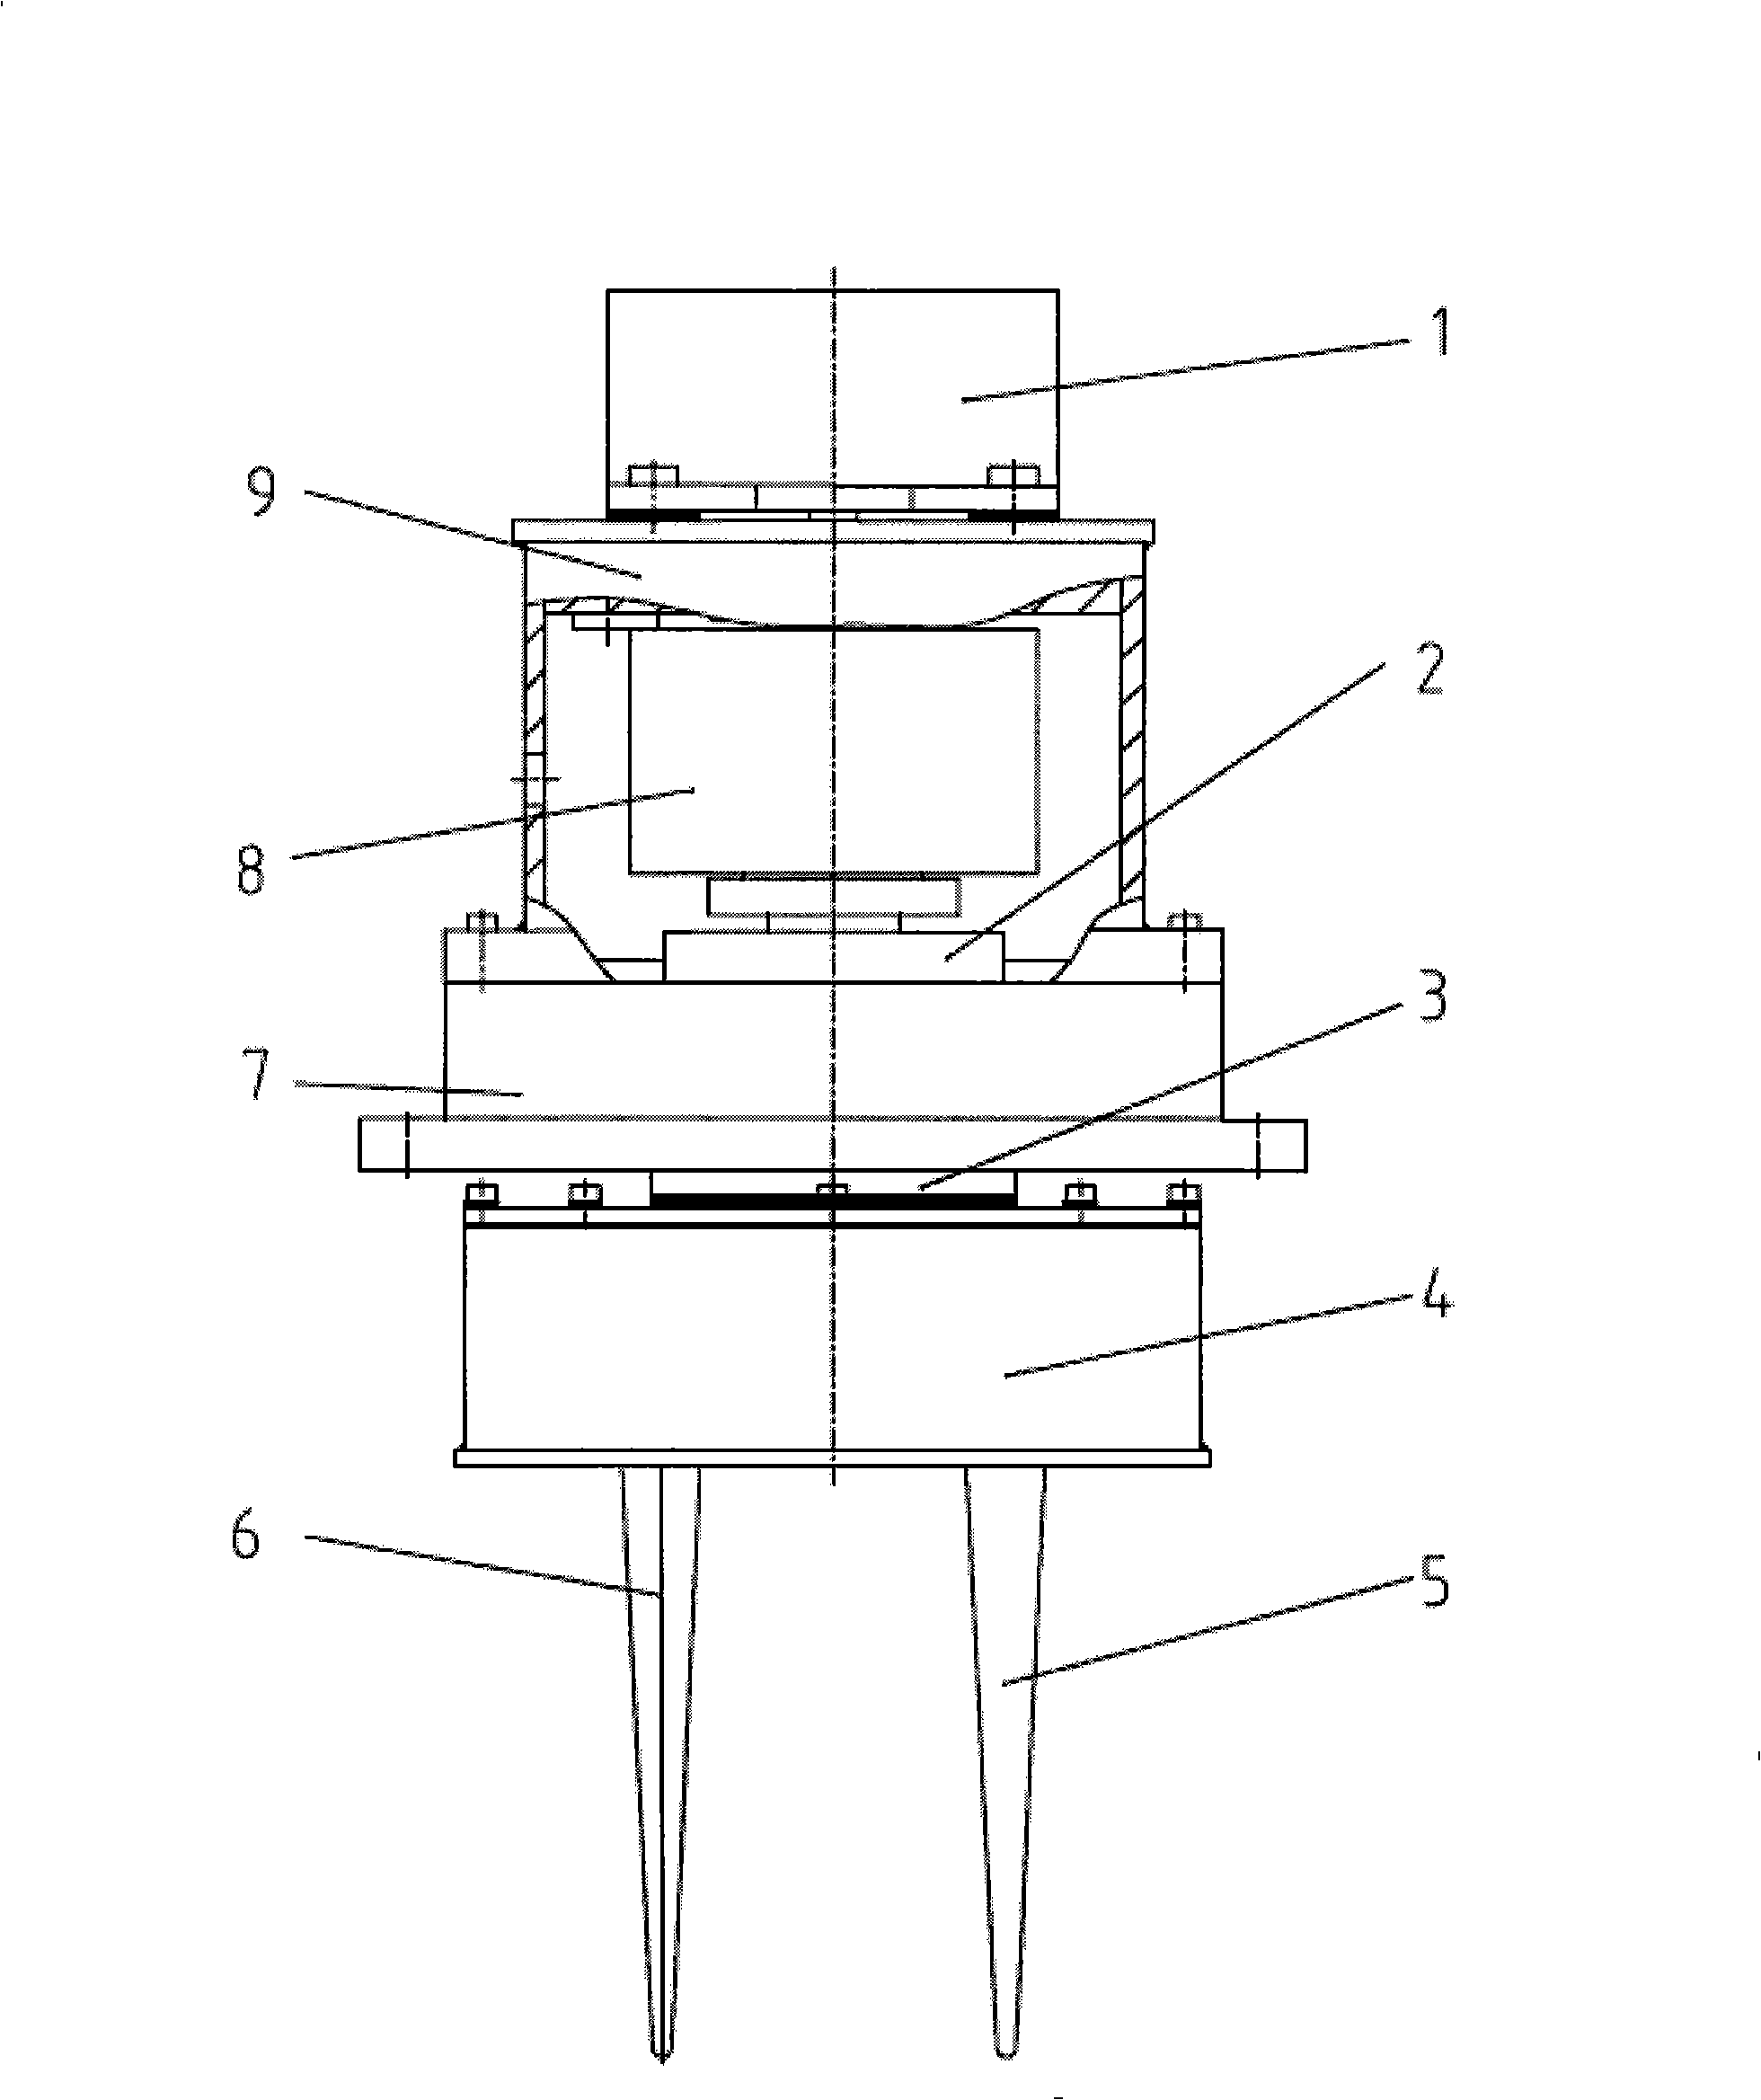 Straight wing cycloid thruster with stepping motor as controlling mechanism